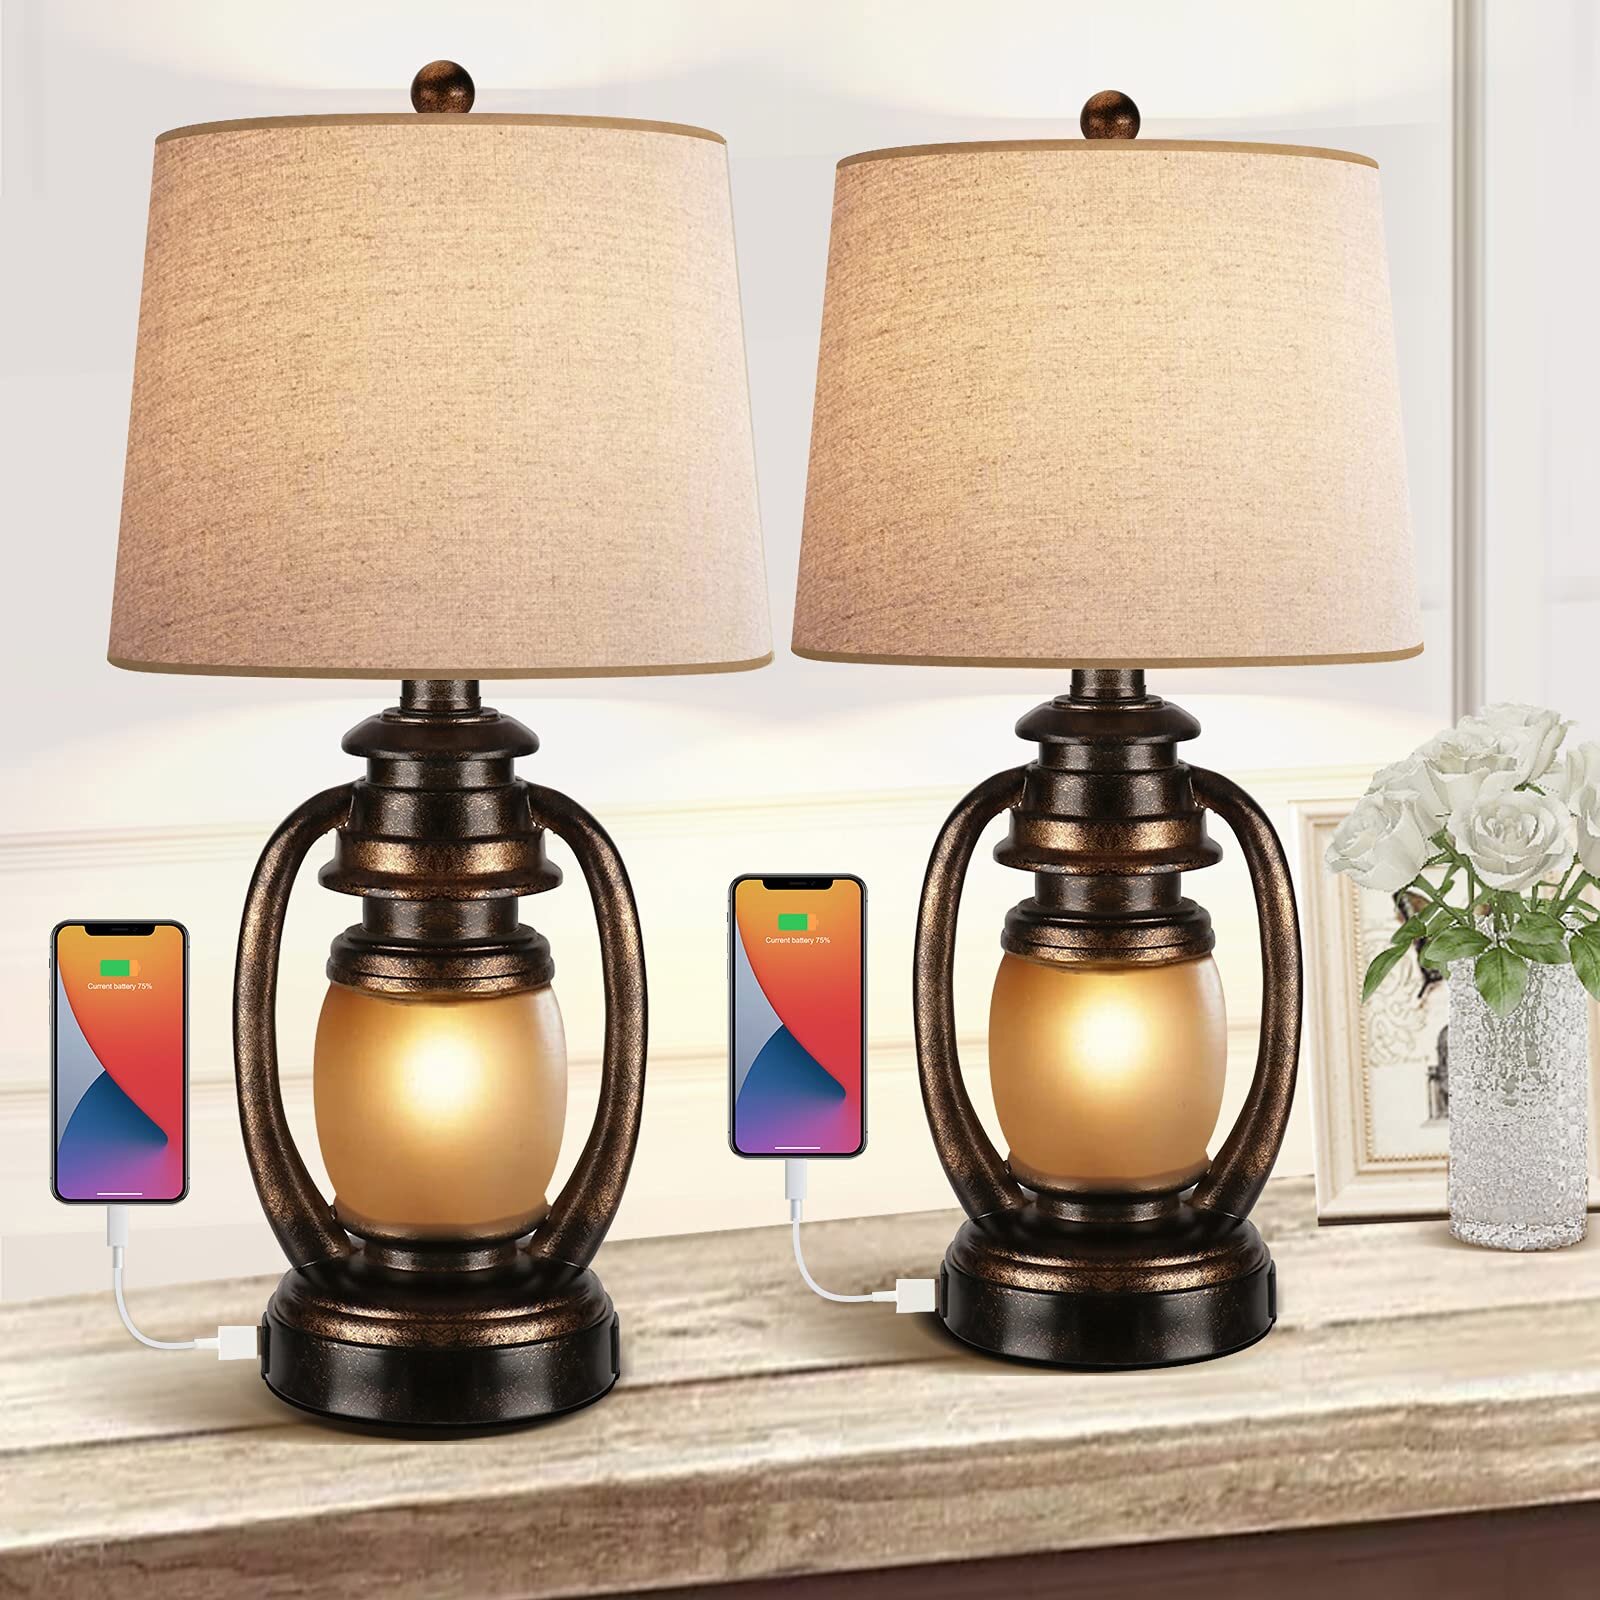 Longshore Tides Farmhouse Bedside Table Lamps For Living Room Set Of 2  Oatmeal Tapered Drum Shade Rustic Bedroom Nightstand Lamps With 2 USB Port  And Outlet | Wayfair